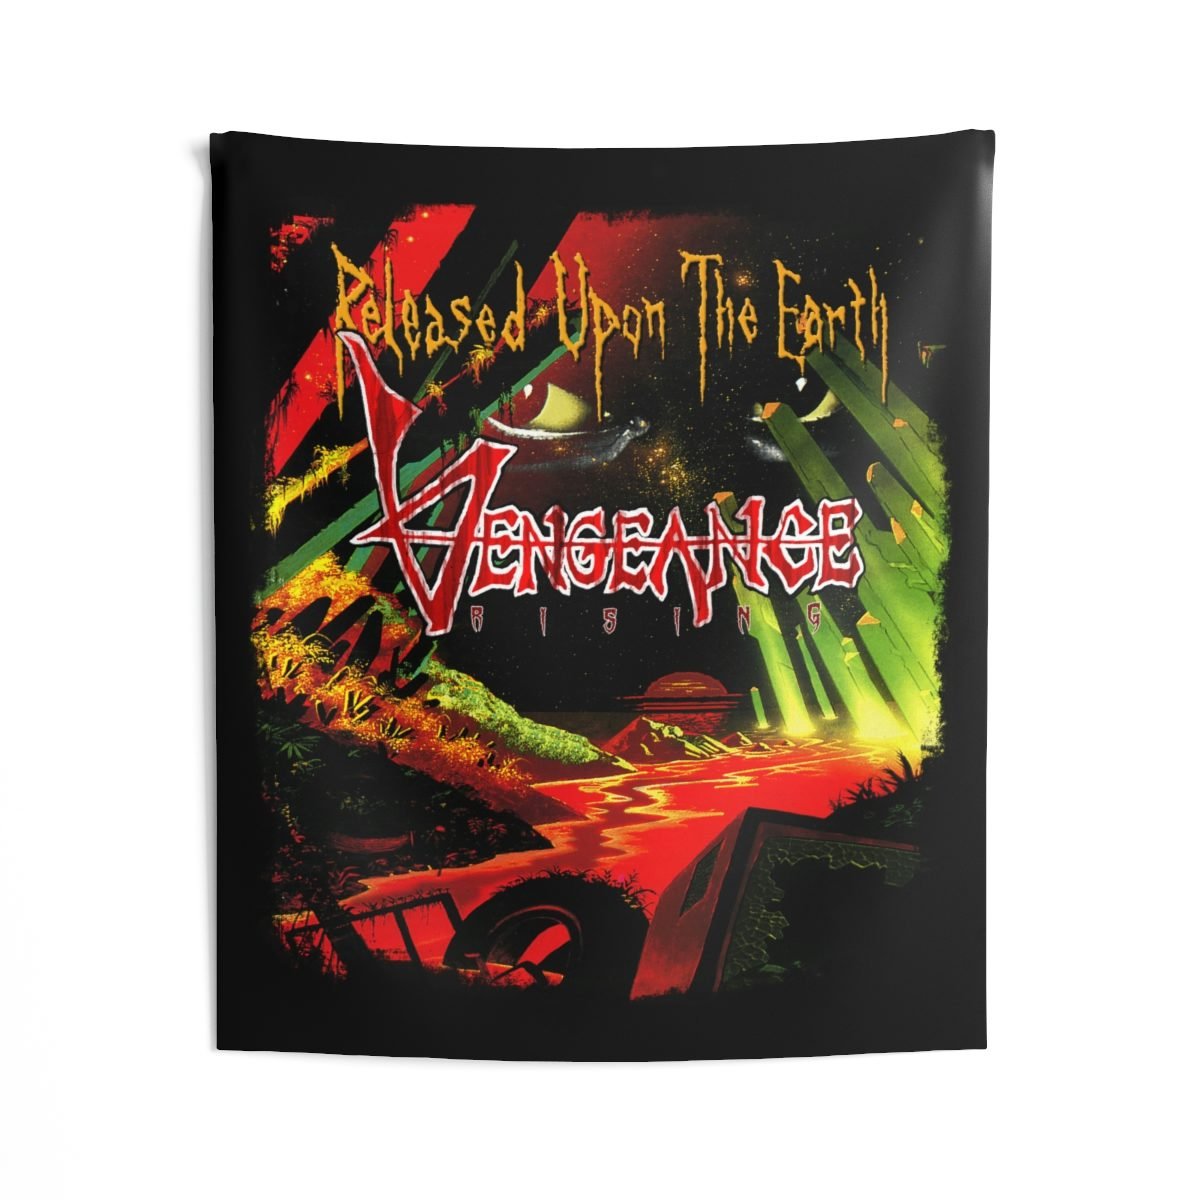 Vengeance Rising – Released Upon The Earth Indoor Wall Tapestries